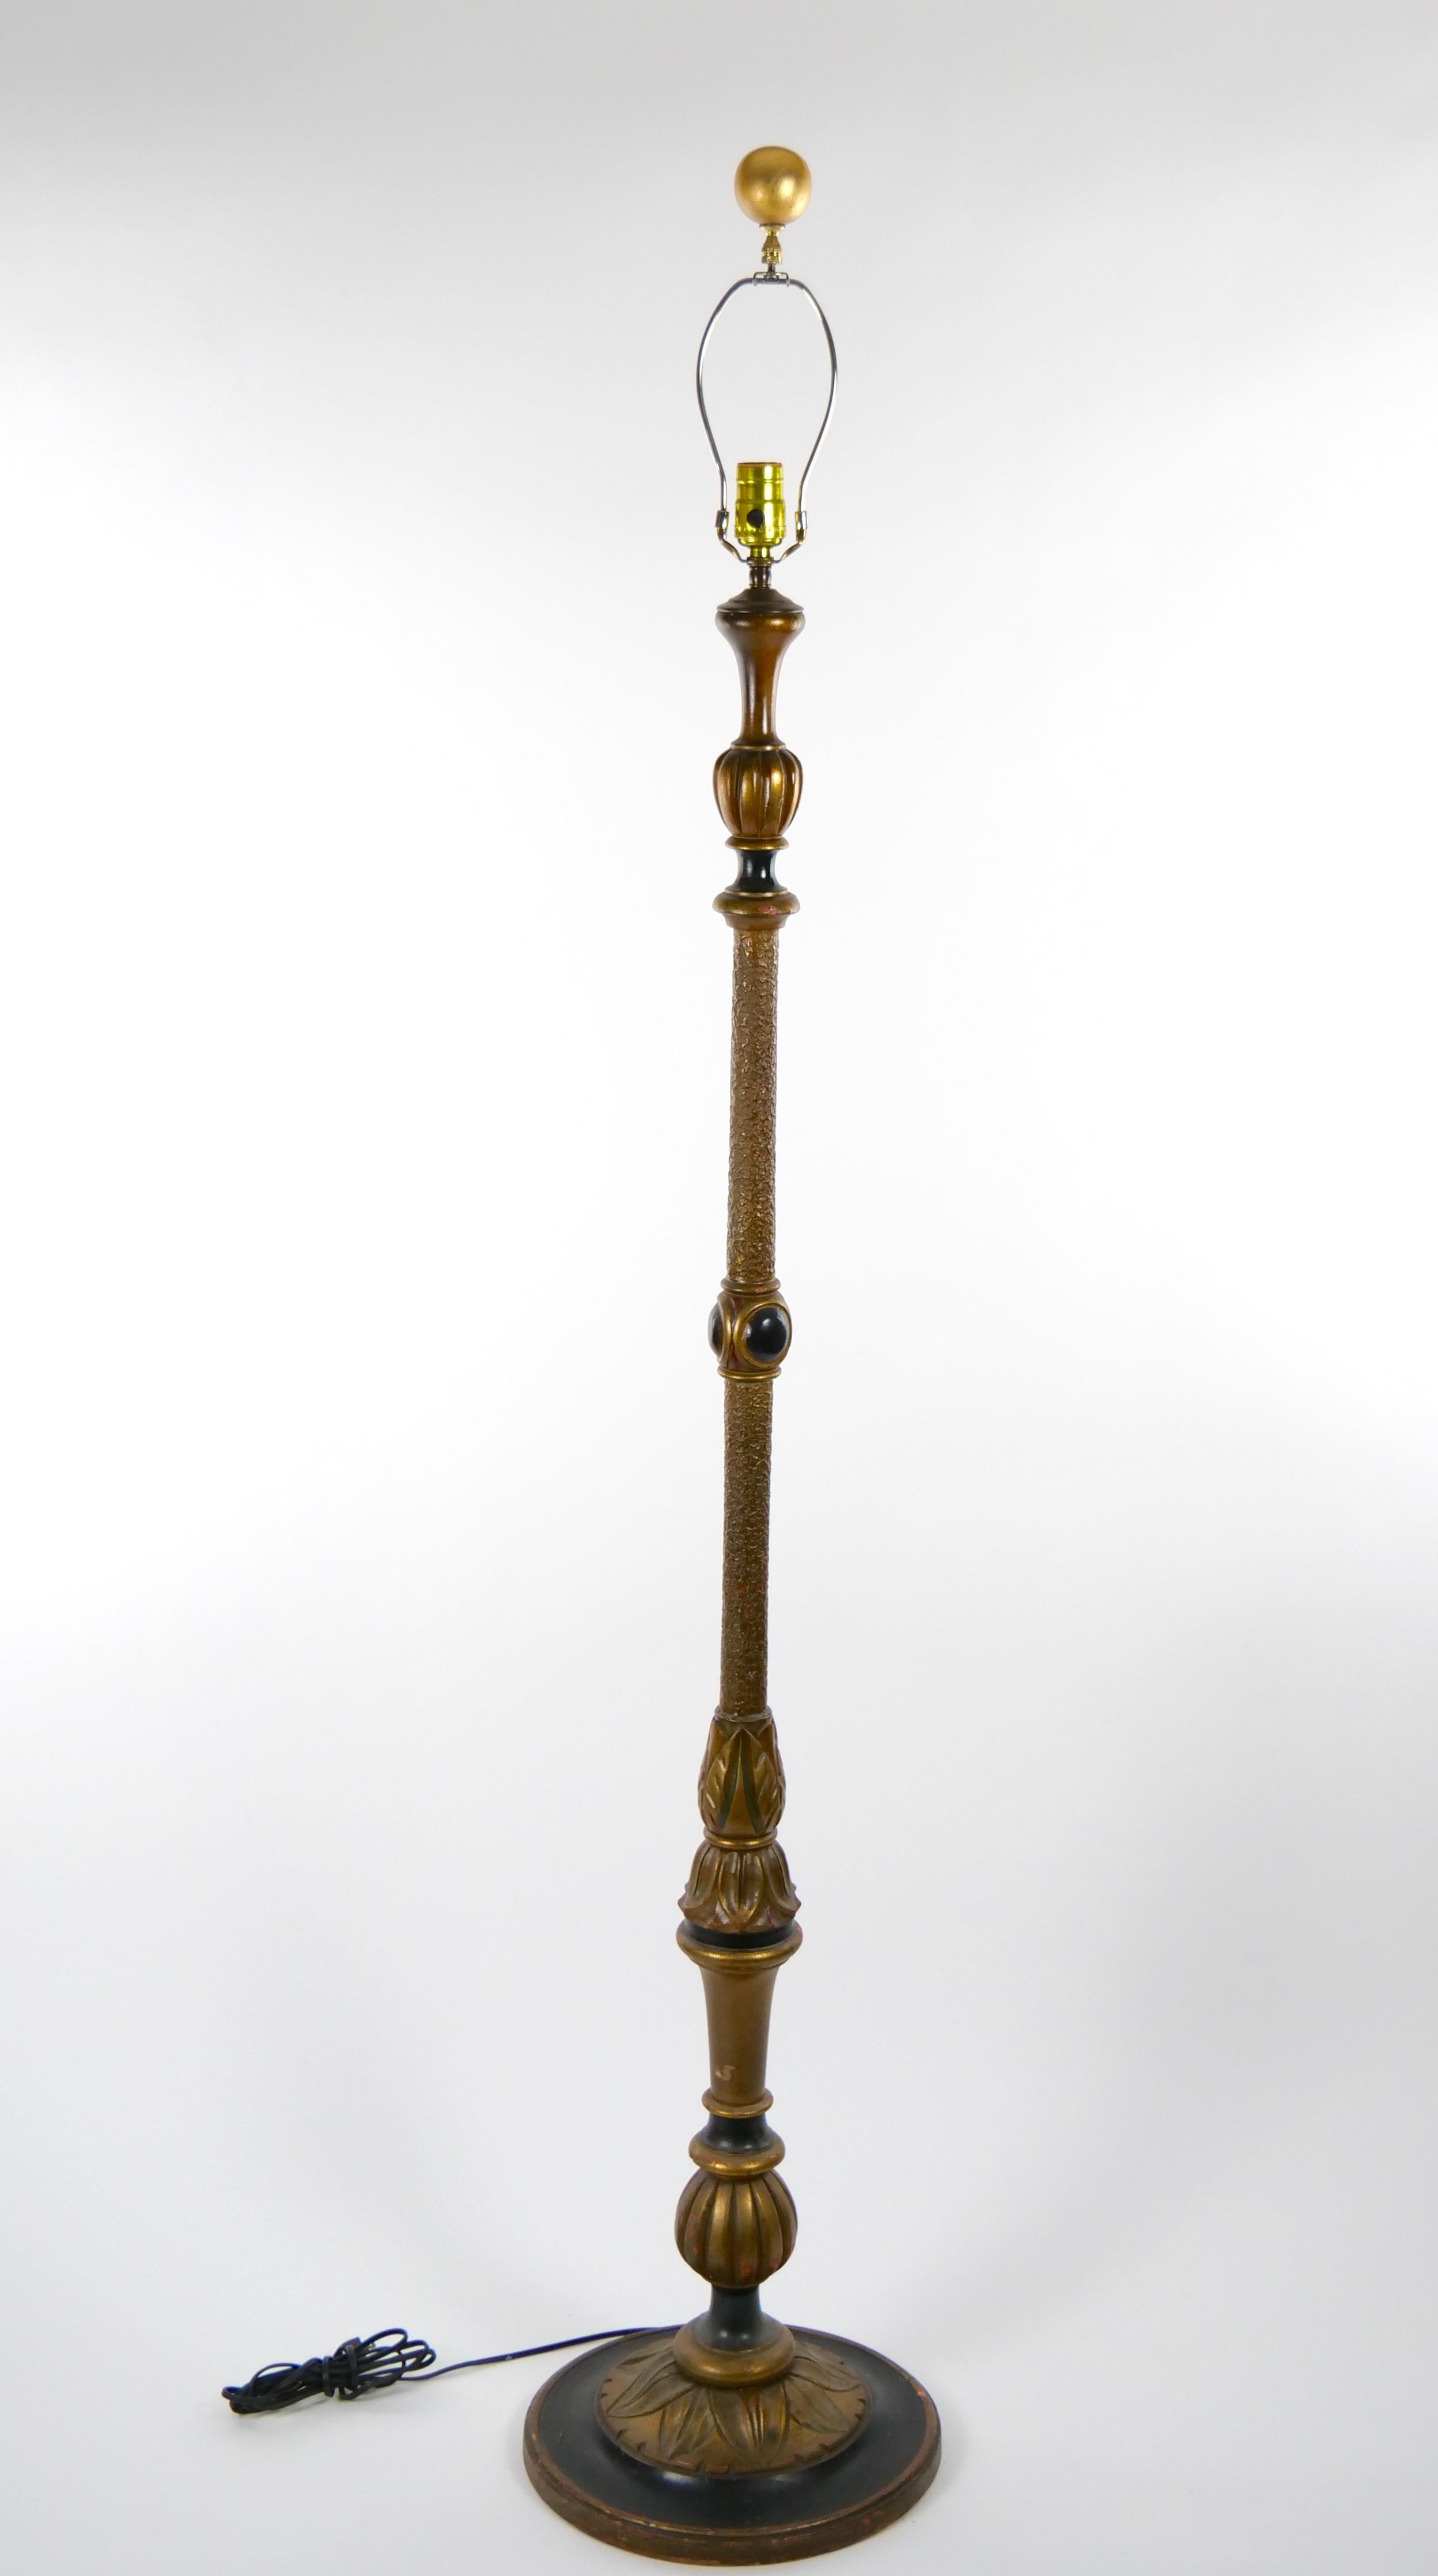 Introducing our opulent gilt wood floor lamp, a true masterpiece of craftsmanship. Each element, from the meticulously hand-painted details to the intricately turned and hand carved wooden frame and base, showcases the utmost attention to detail.